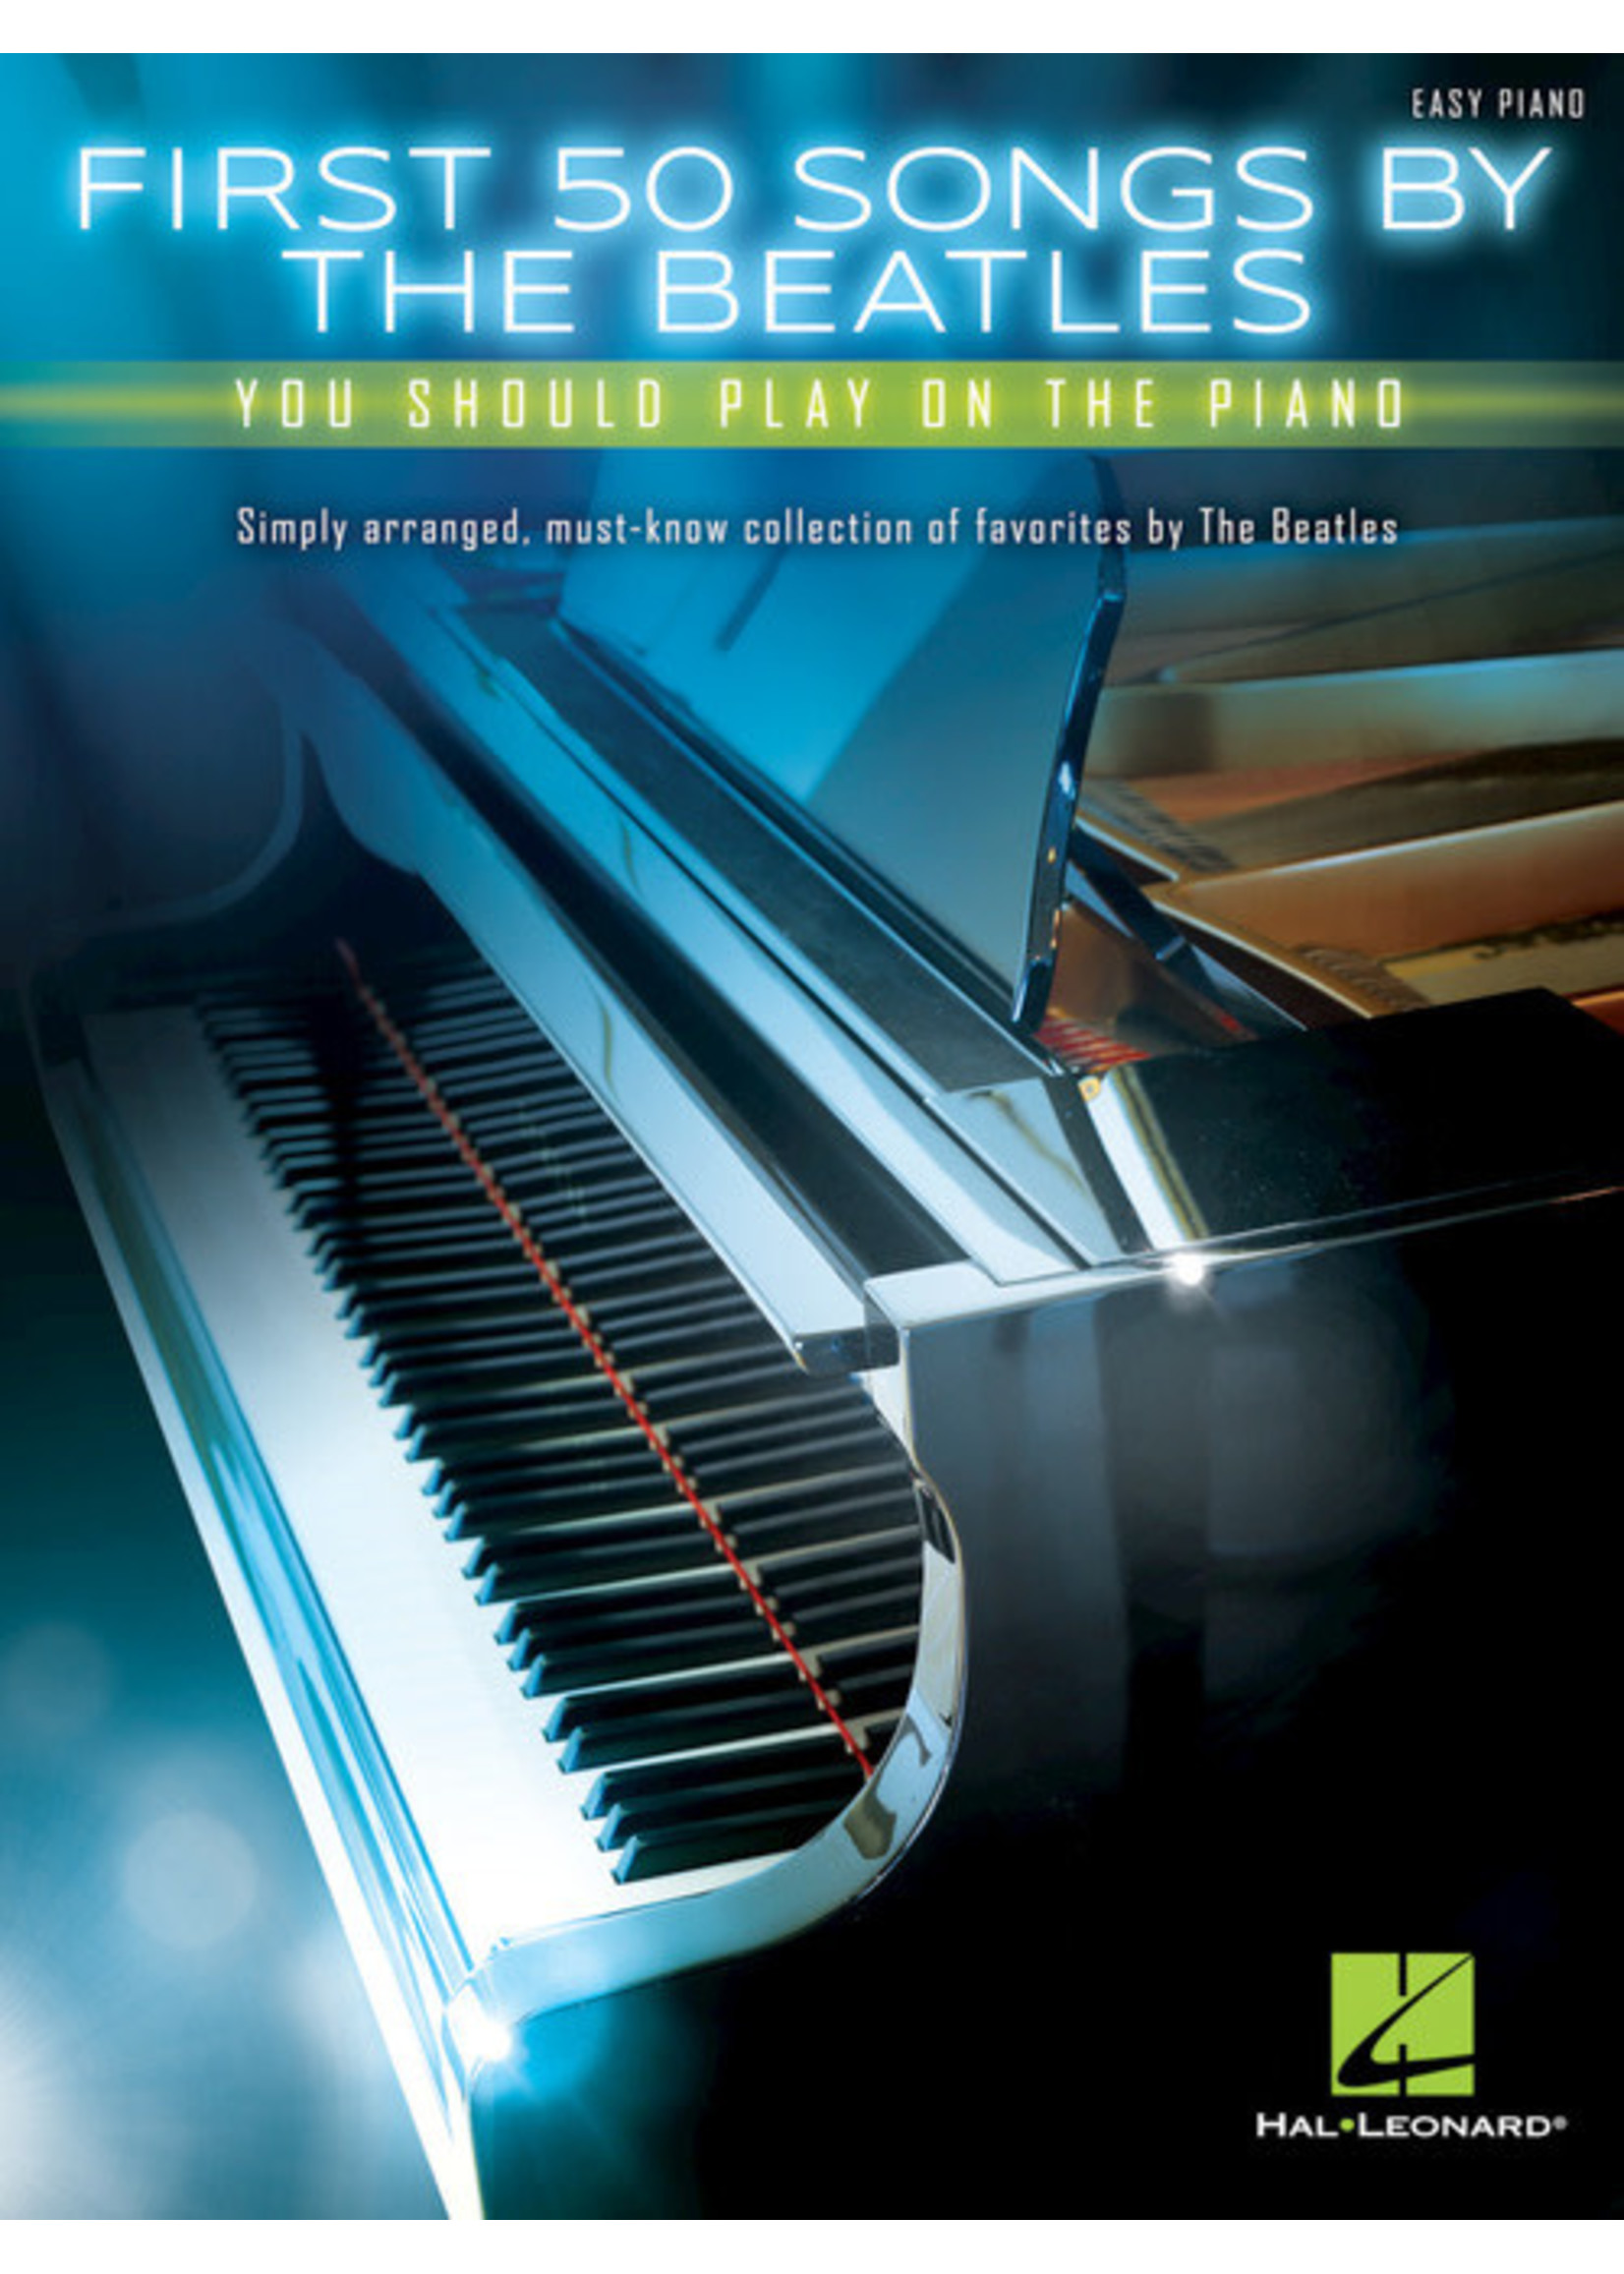 Hal Leonard First 50 Songs by the Beatles (You Should Play on the Piano) EP